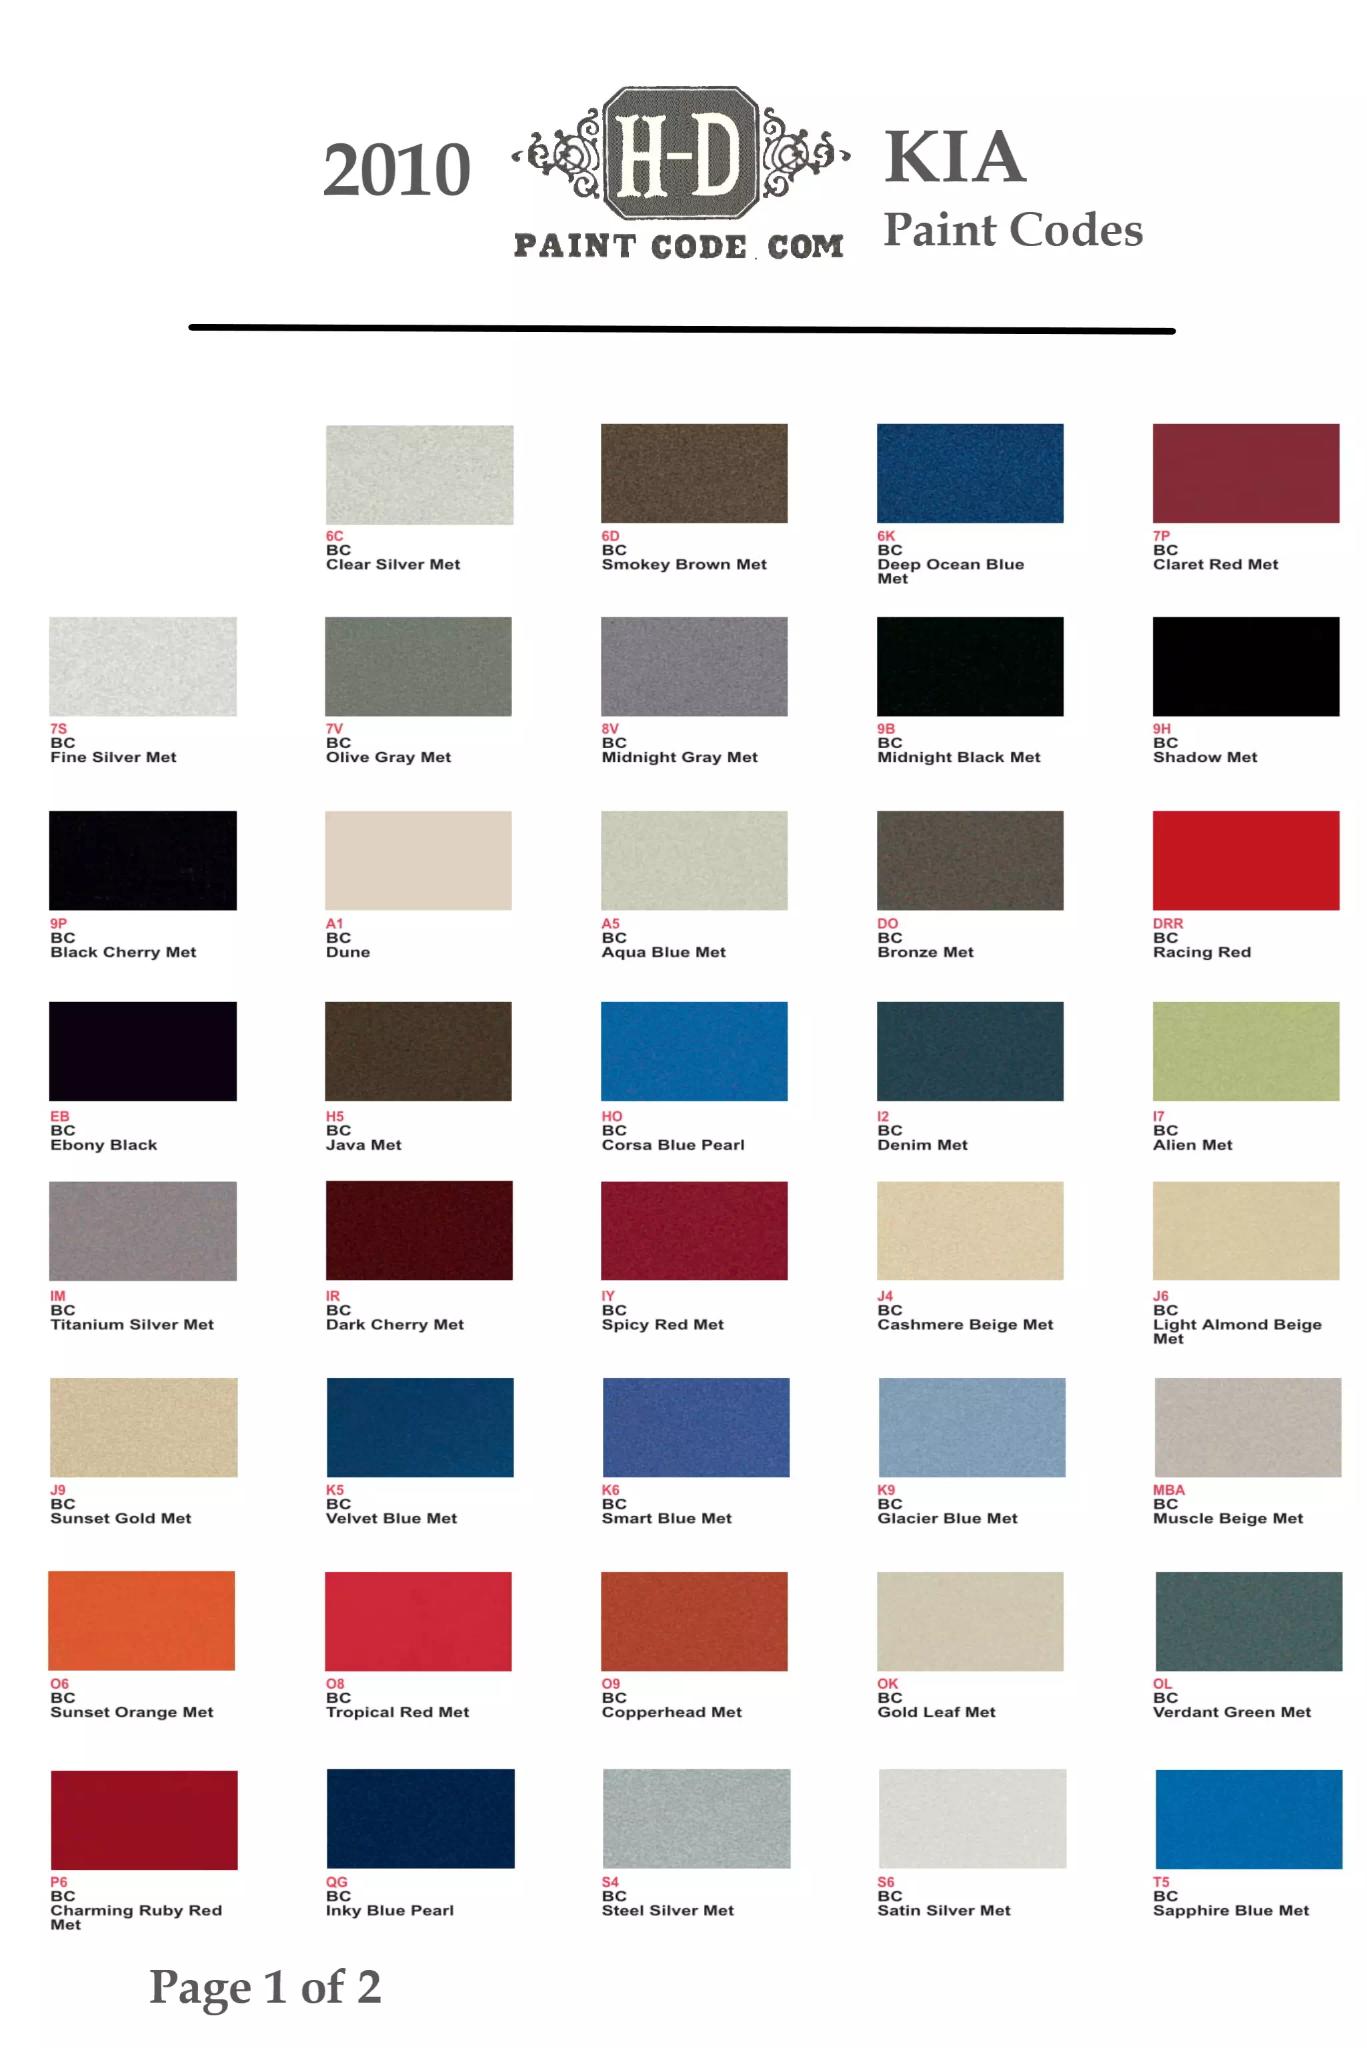 Exterior Paint Colors for Kia Vehicles in 2010